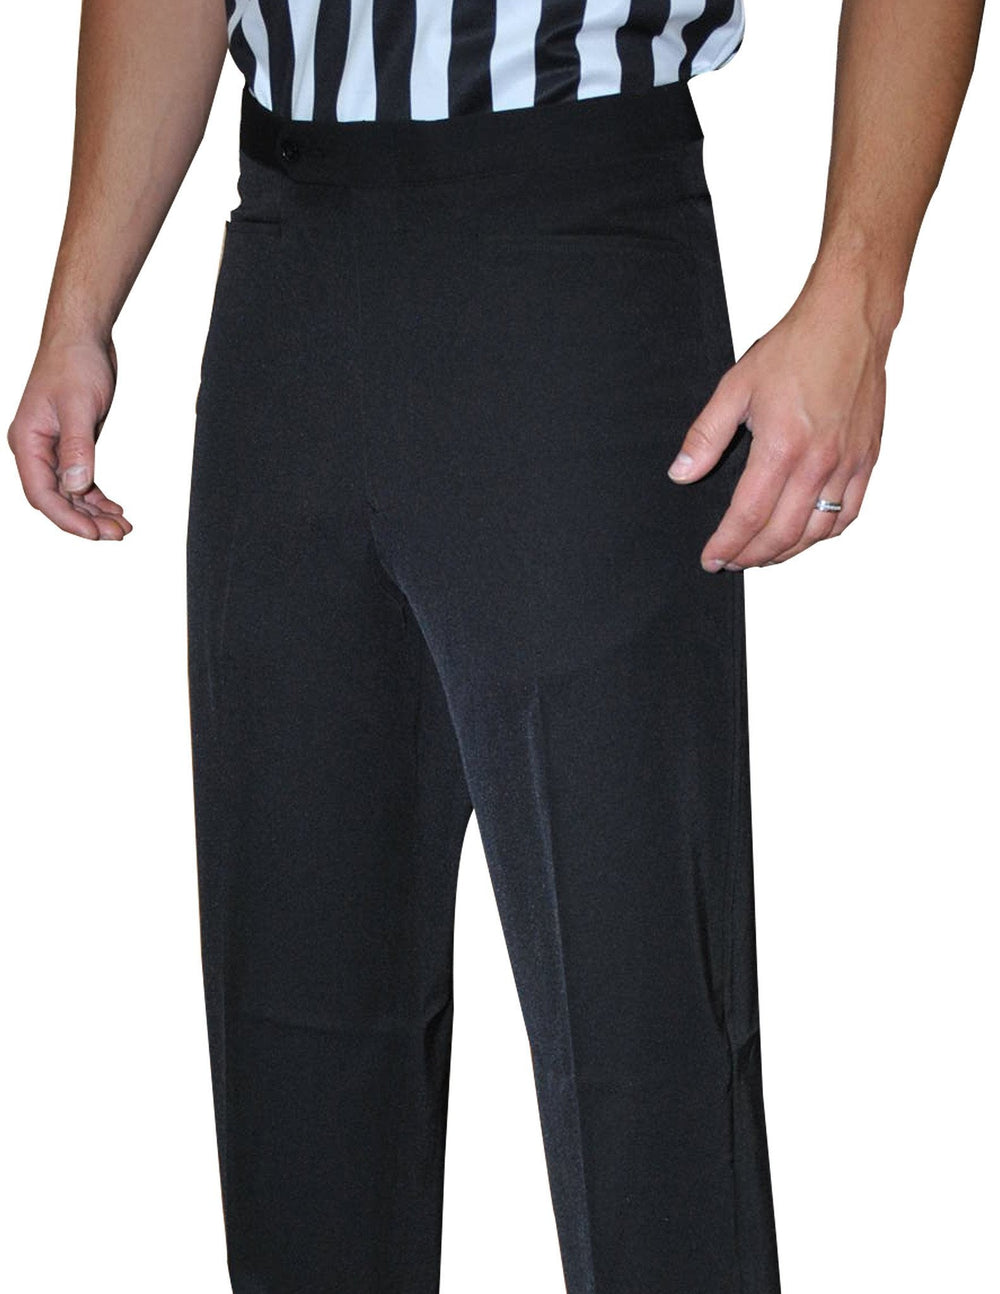 Smitty 100% Polyester Flat Front Pants w/ Western Cut Pockets